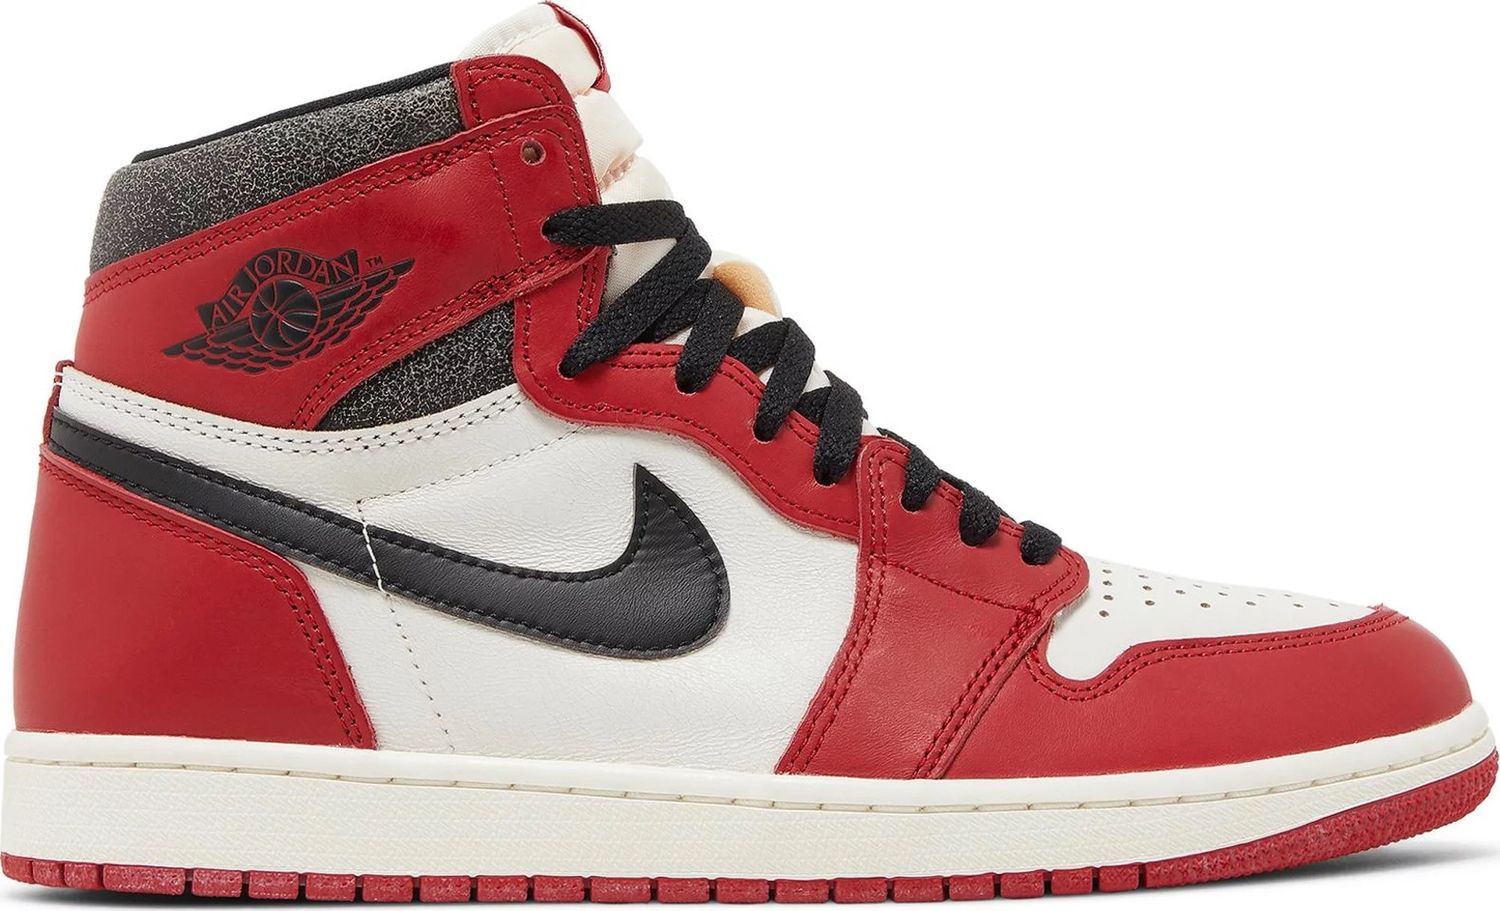 Dior Air Jordan 1 High OG  Everything you need to know